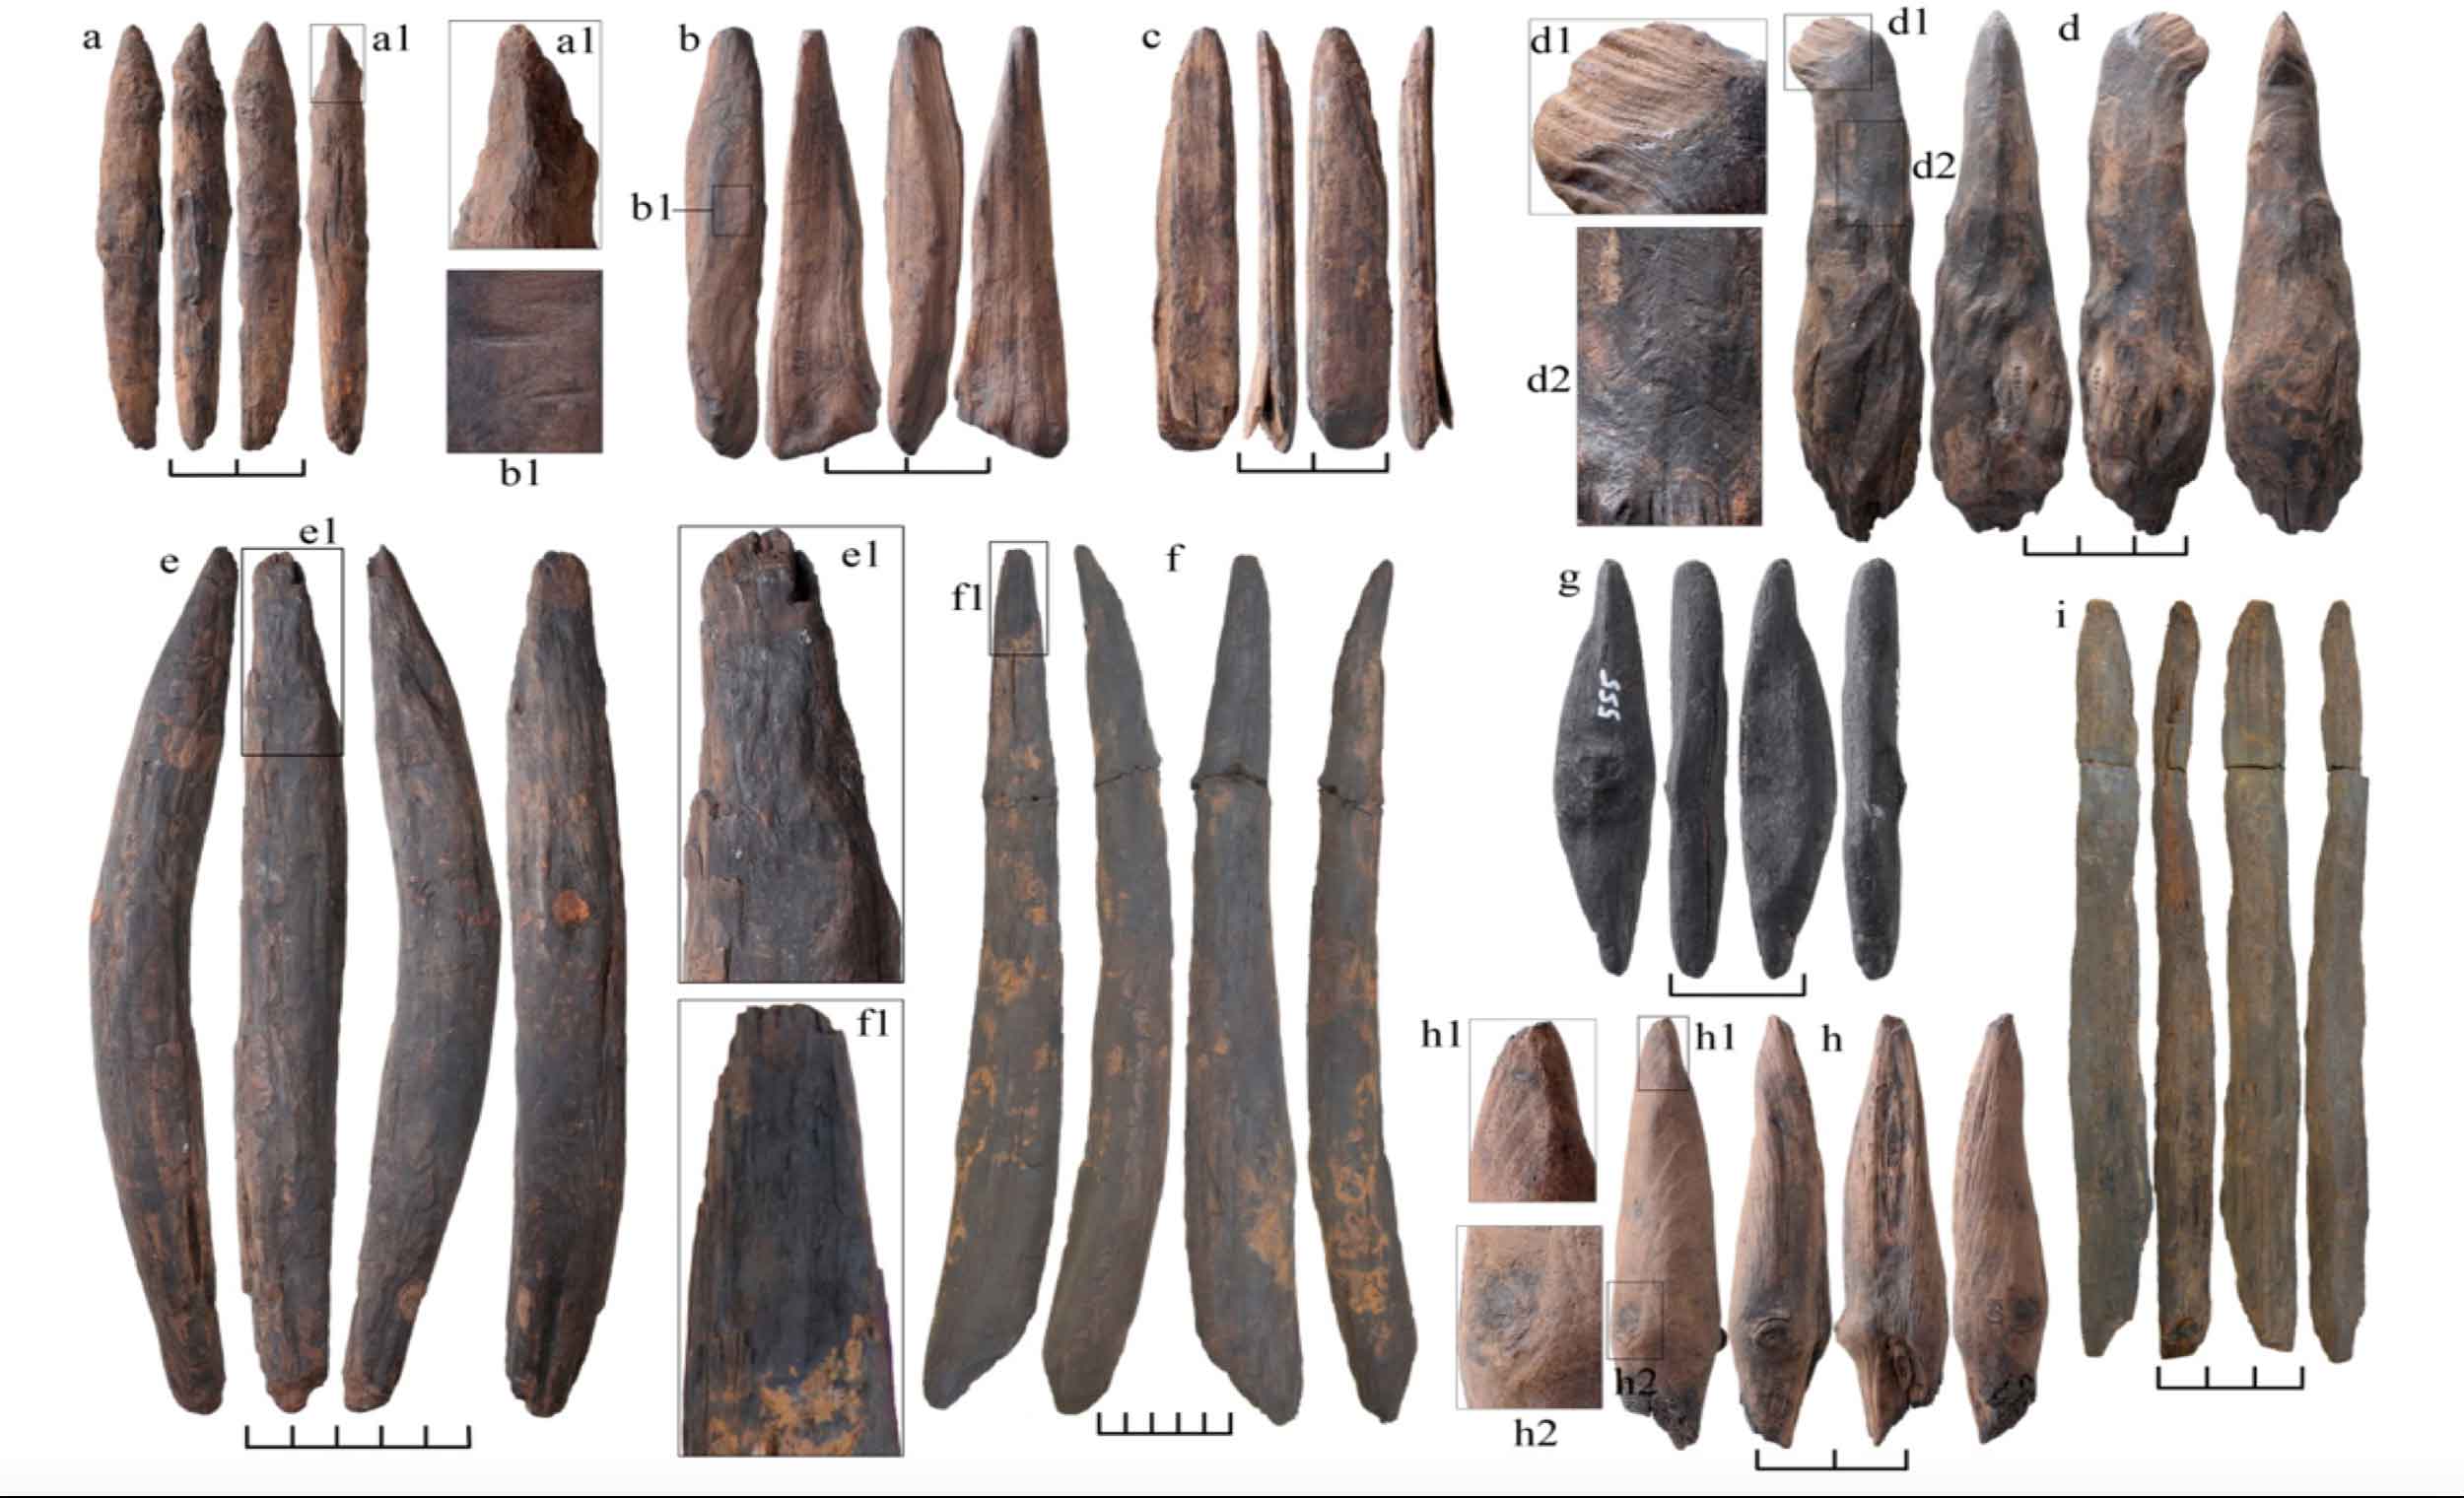 Four amazing Stone Age sites with wooden artifacts